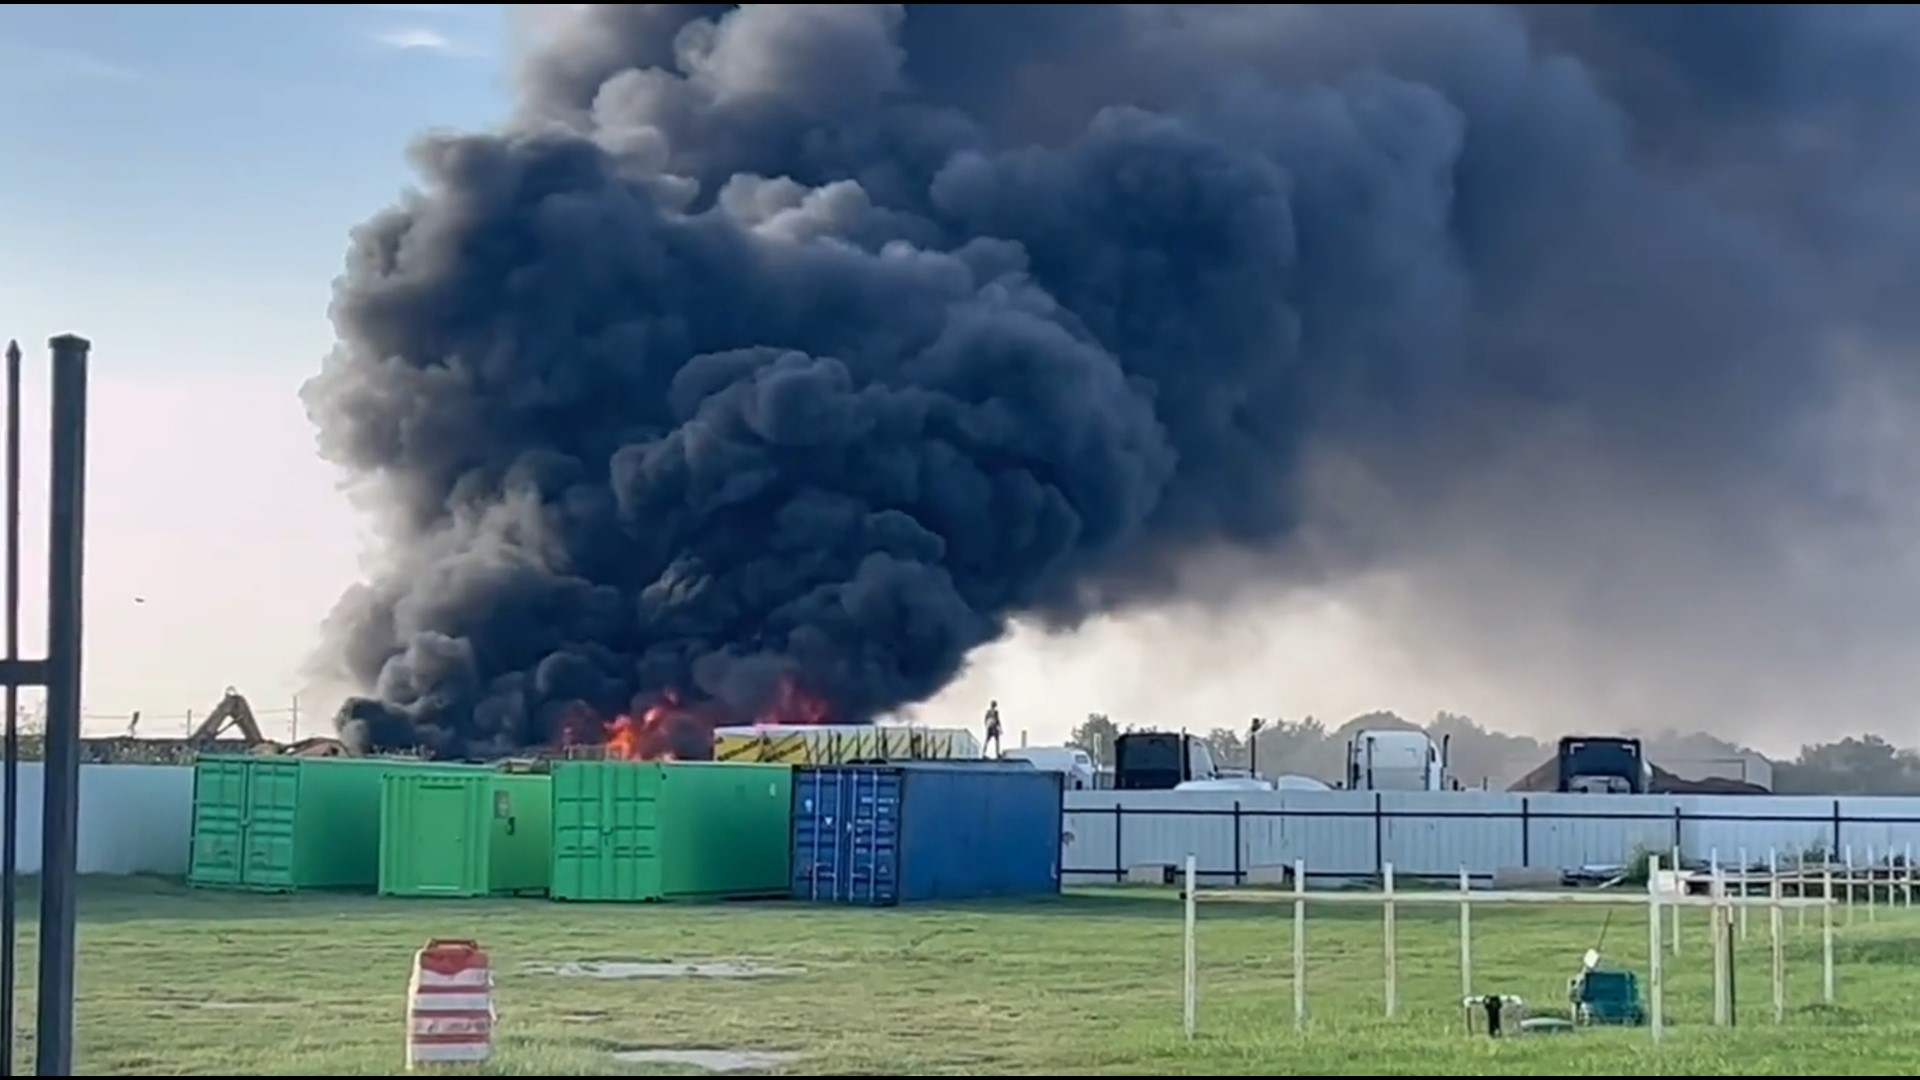 Flames and a towering plume of smoke were seen coming from a scrap metal facility on Katy Hockley Road in northwest Houston.